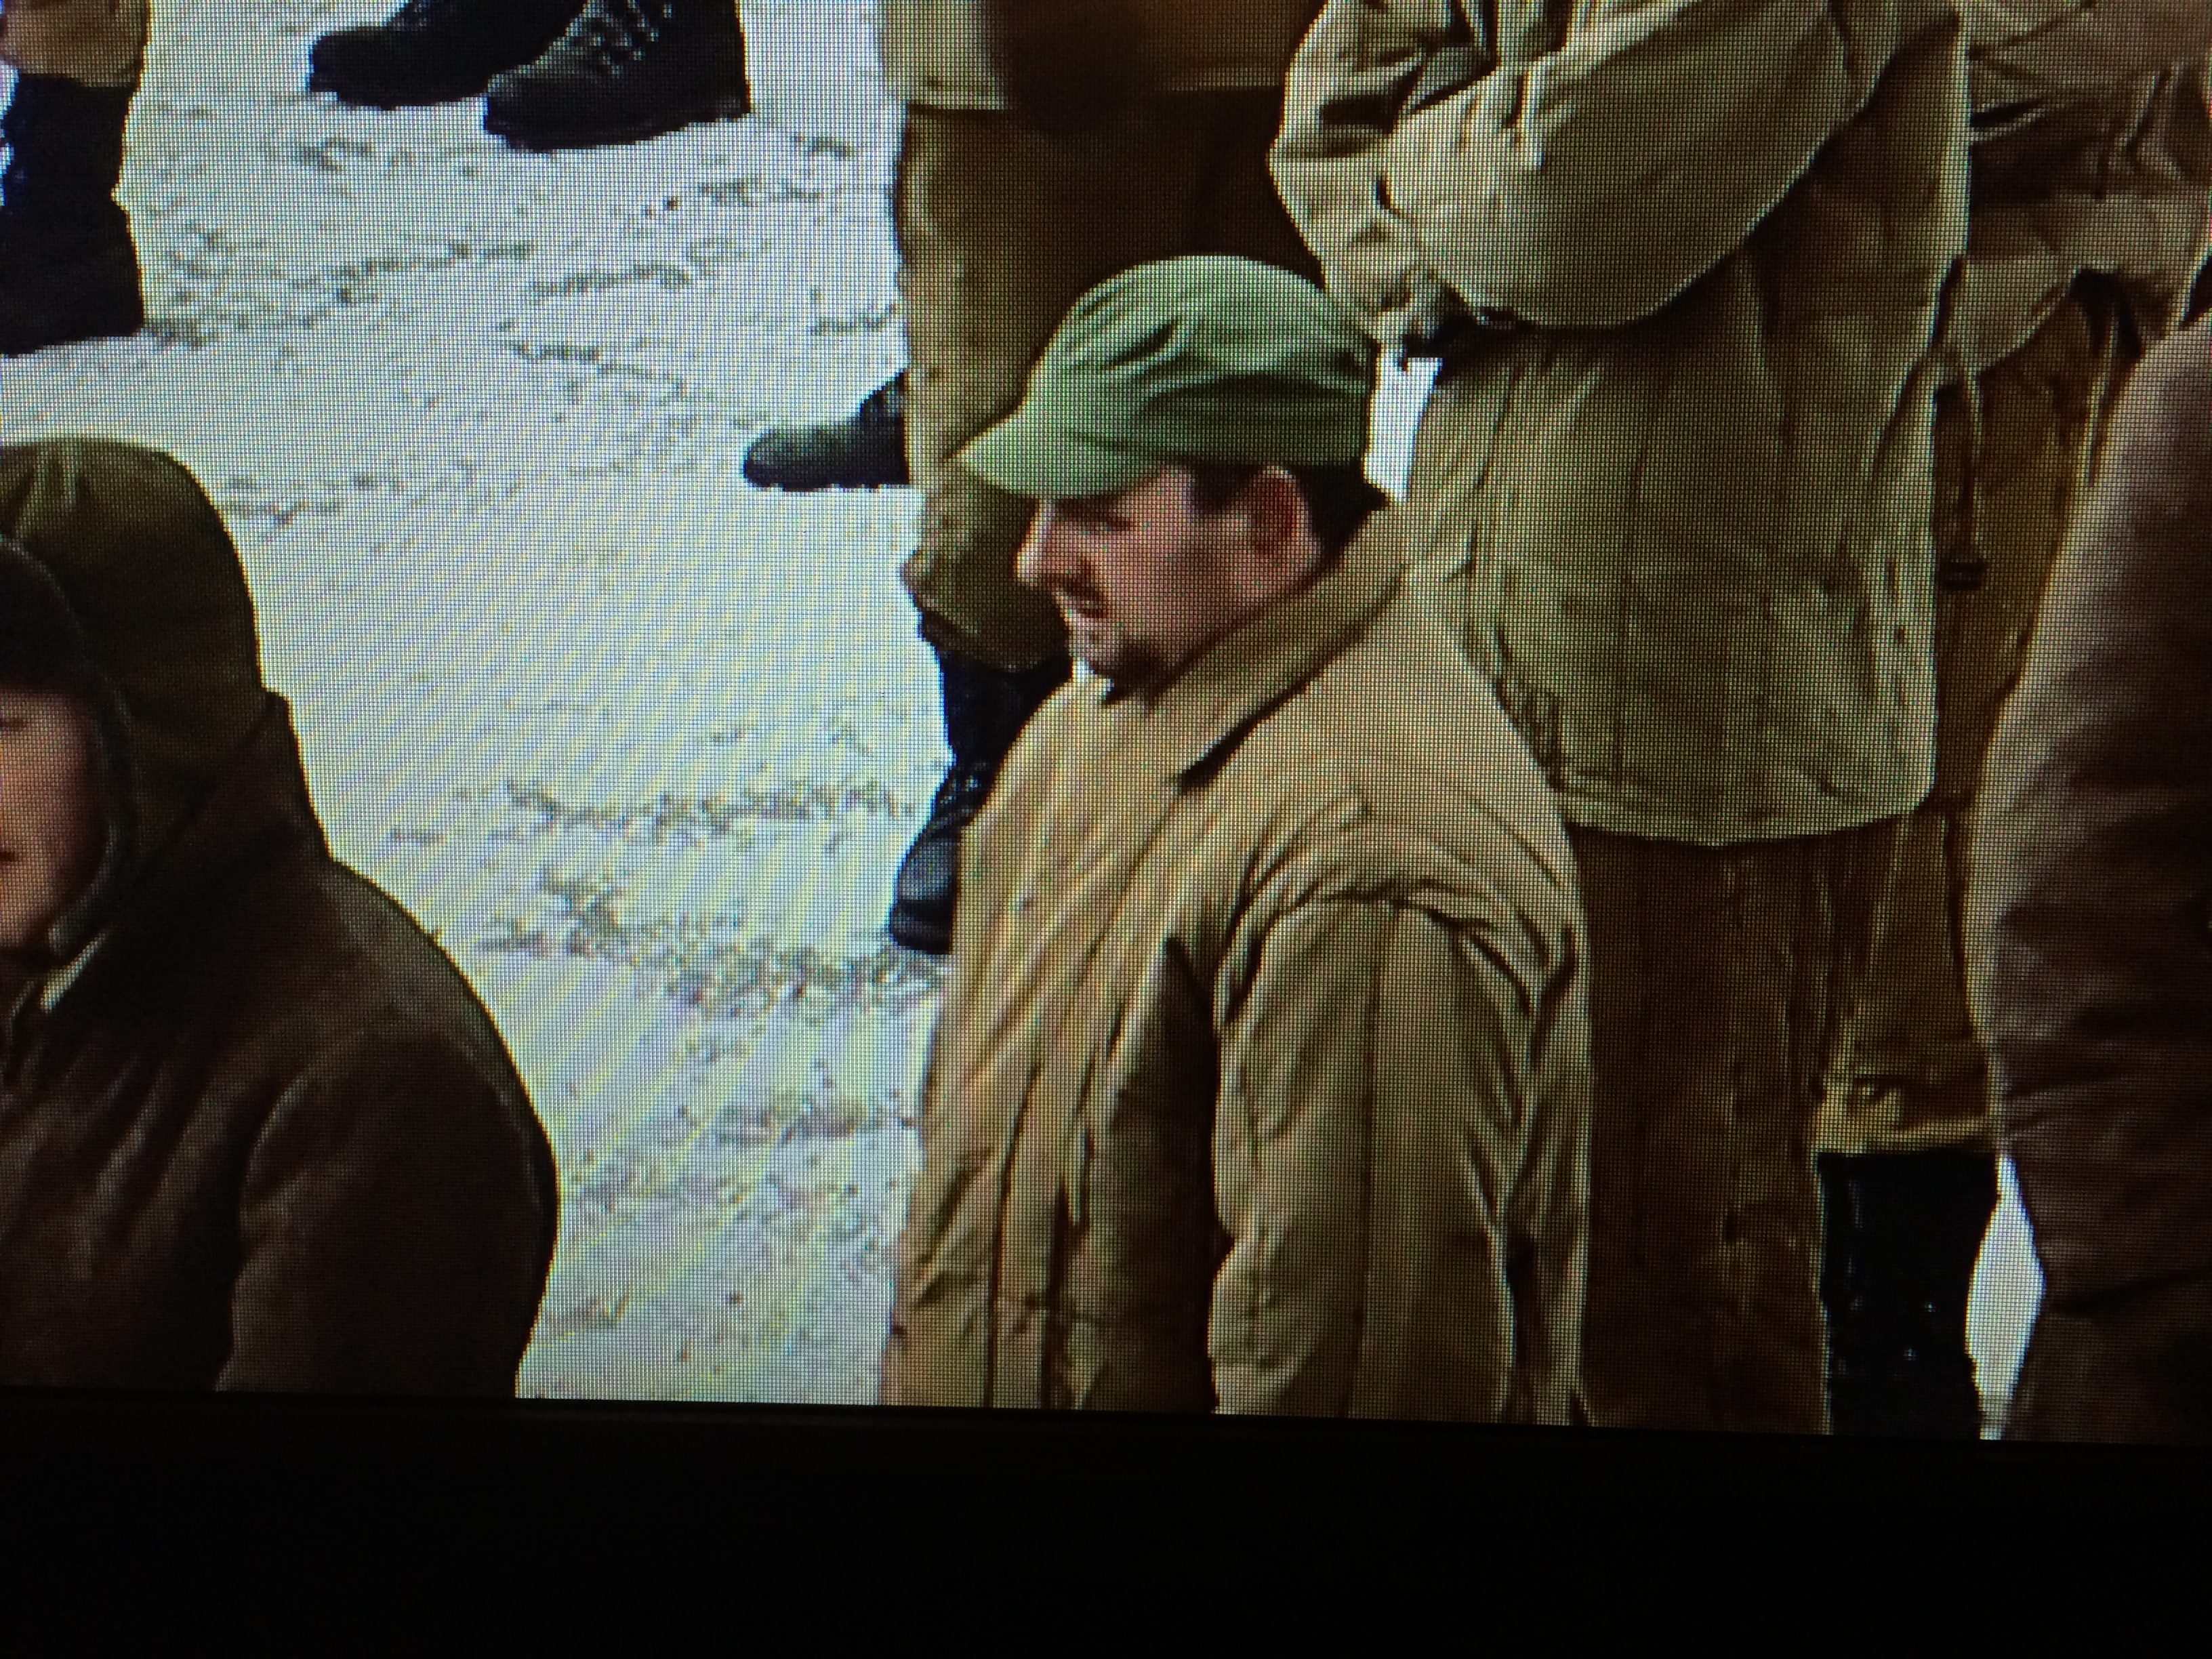 Luke Sheehan in the Muppets Most Wanted.